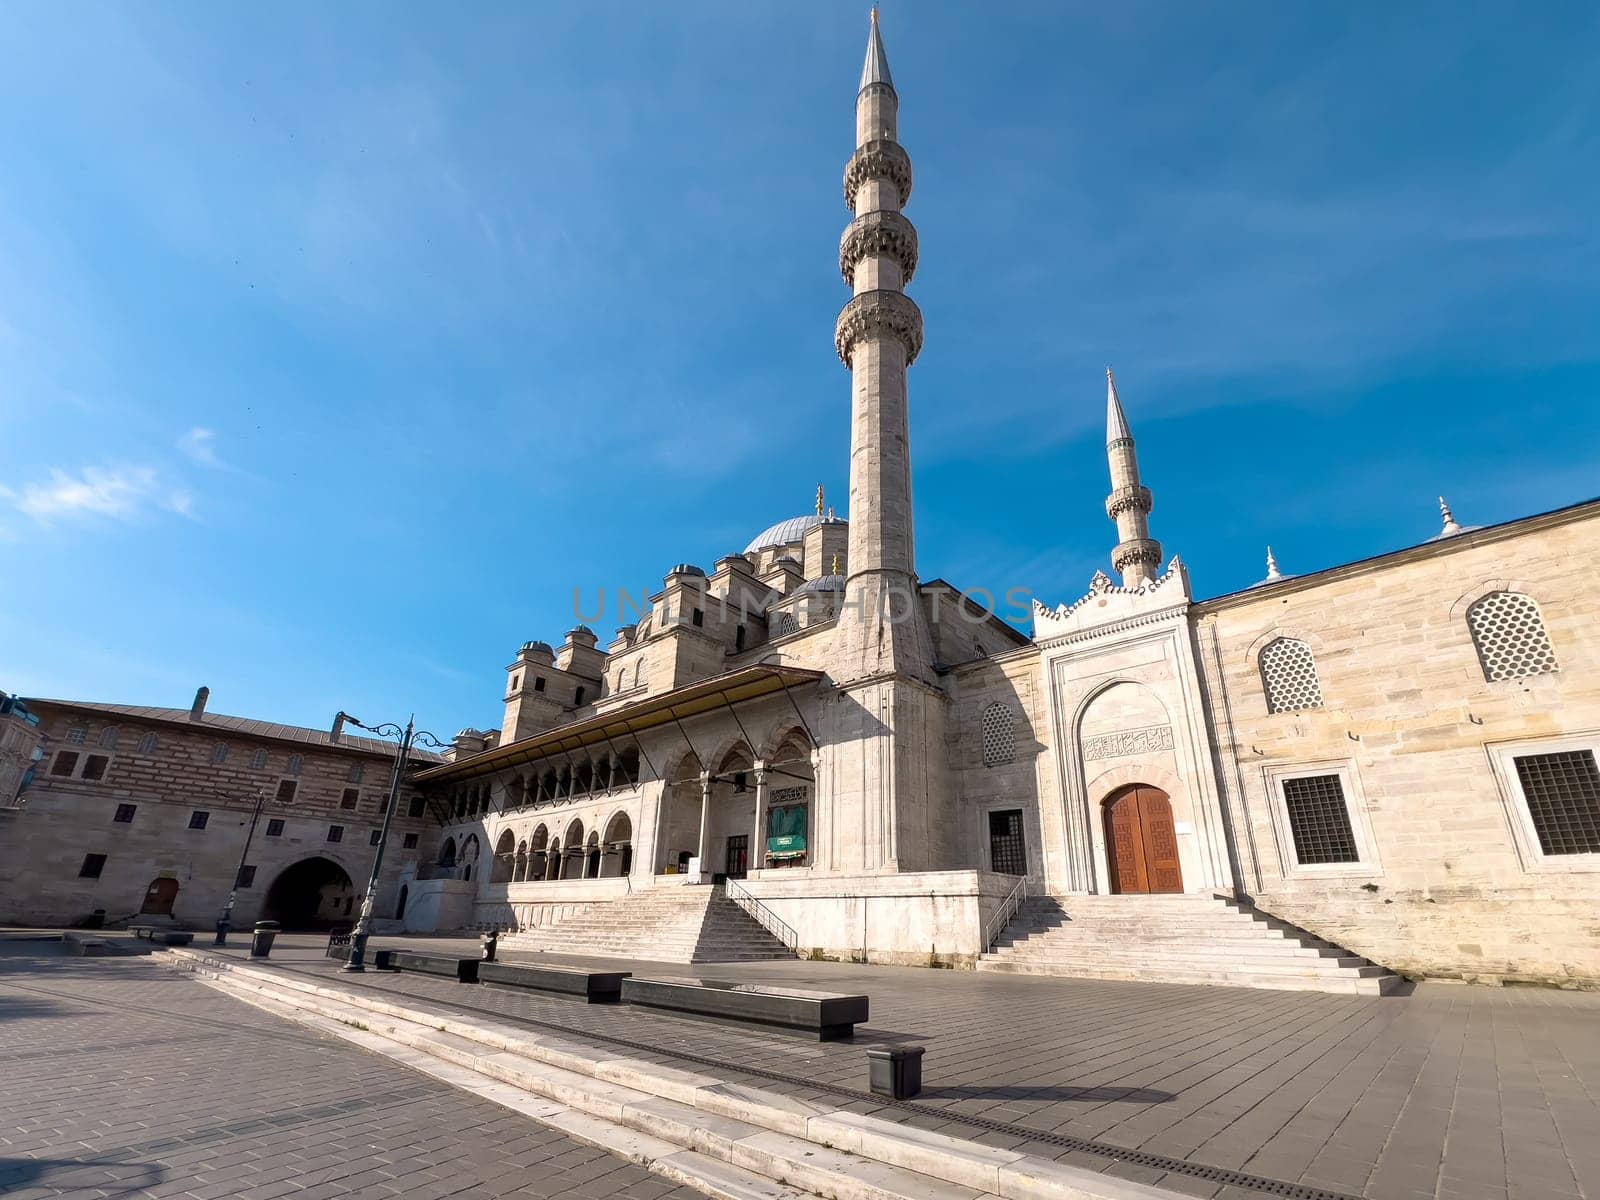 Yeni Cami (New Mosque) located in Eminönü, Istanbul on a sunny spring day by Sonat